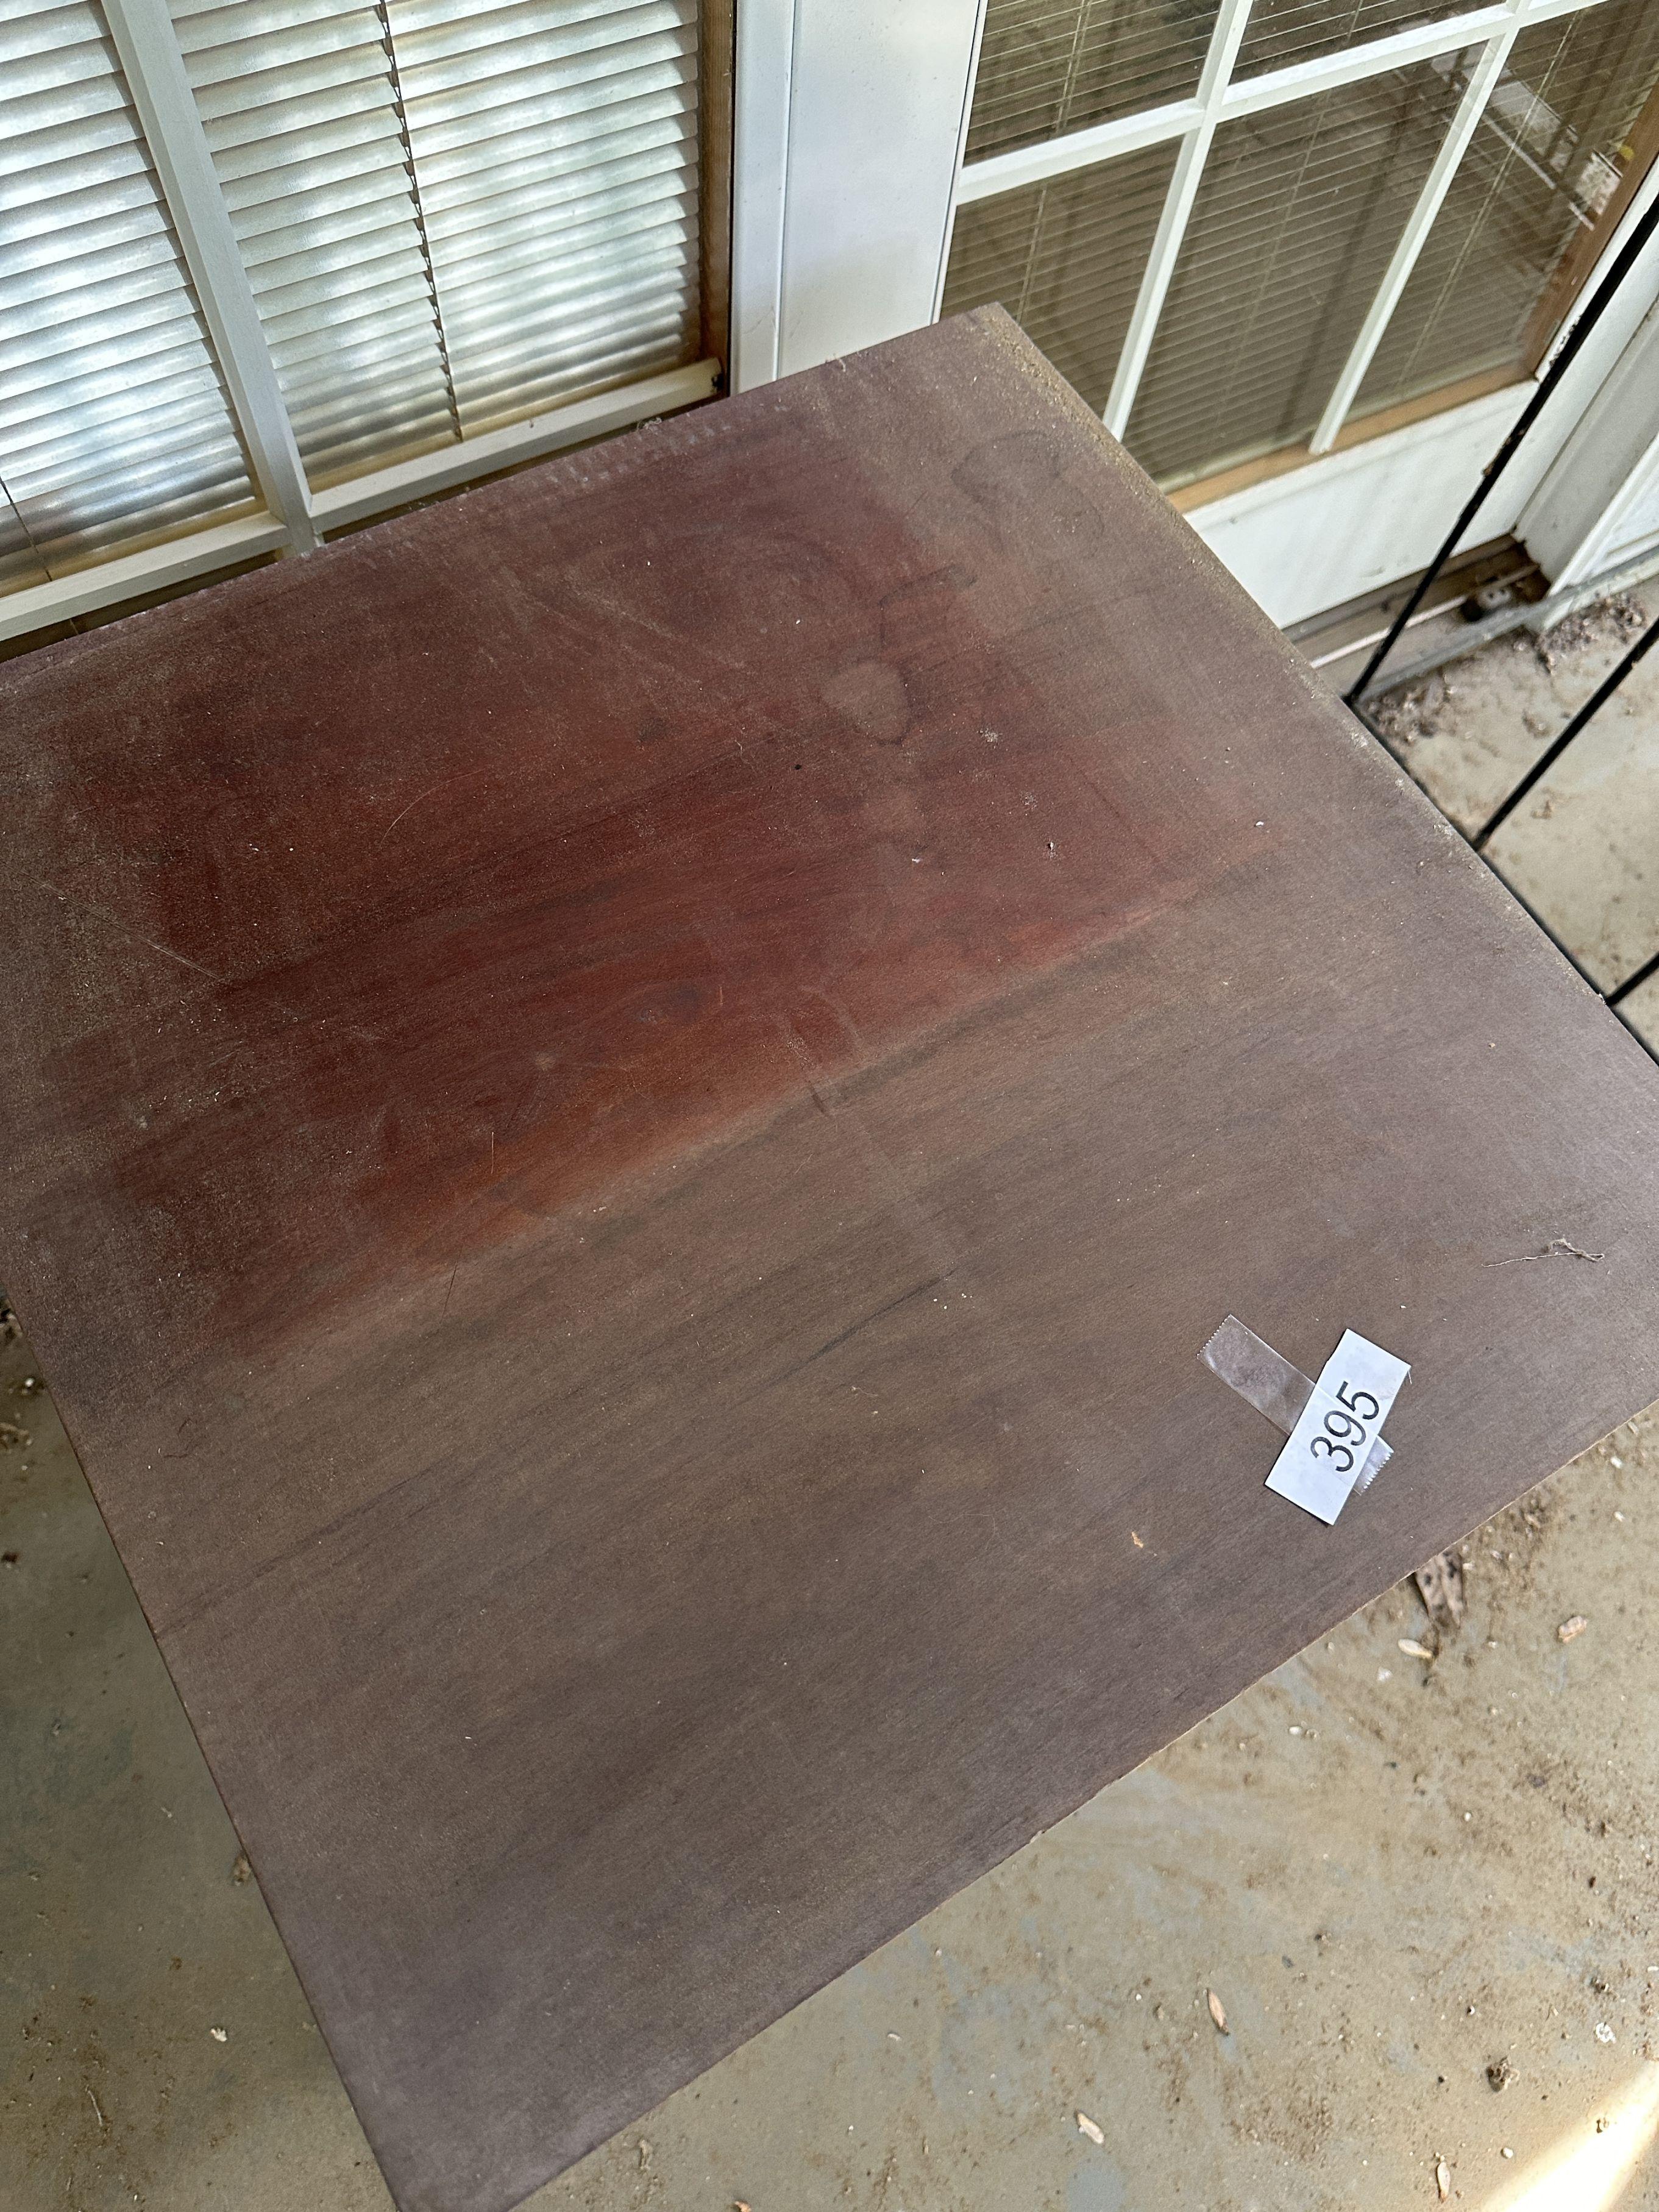 Vintage 1 Drawer Table (Local Pick Up Only)